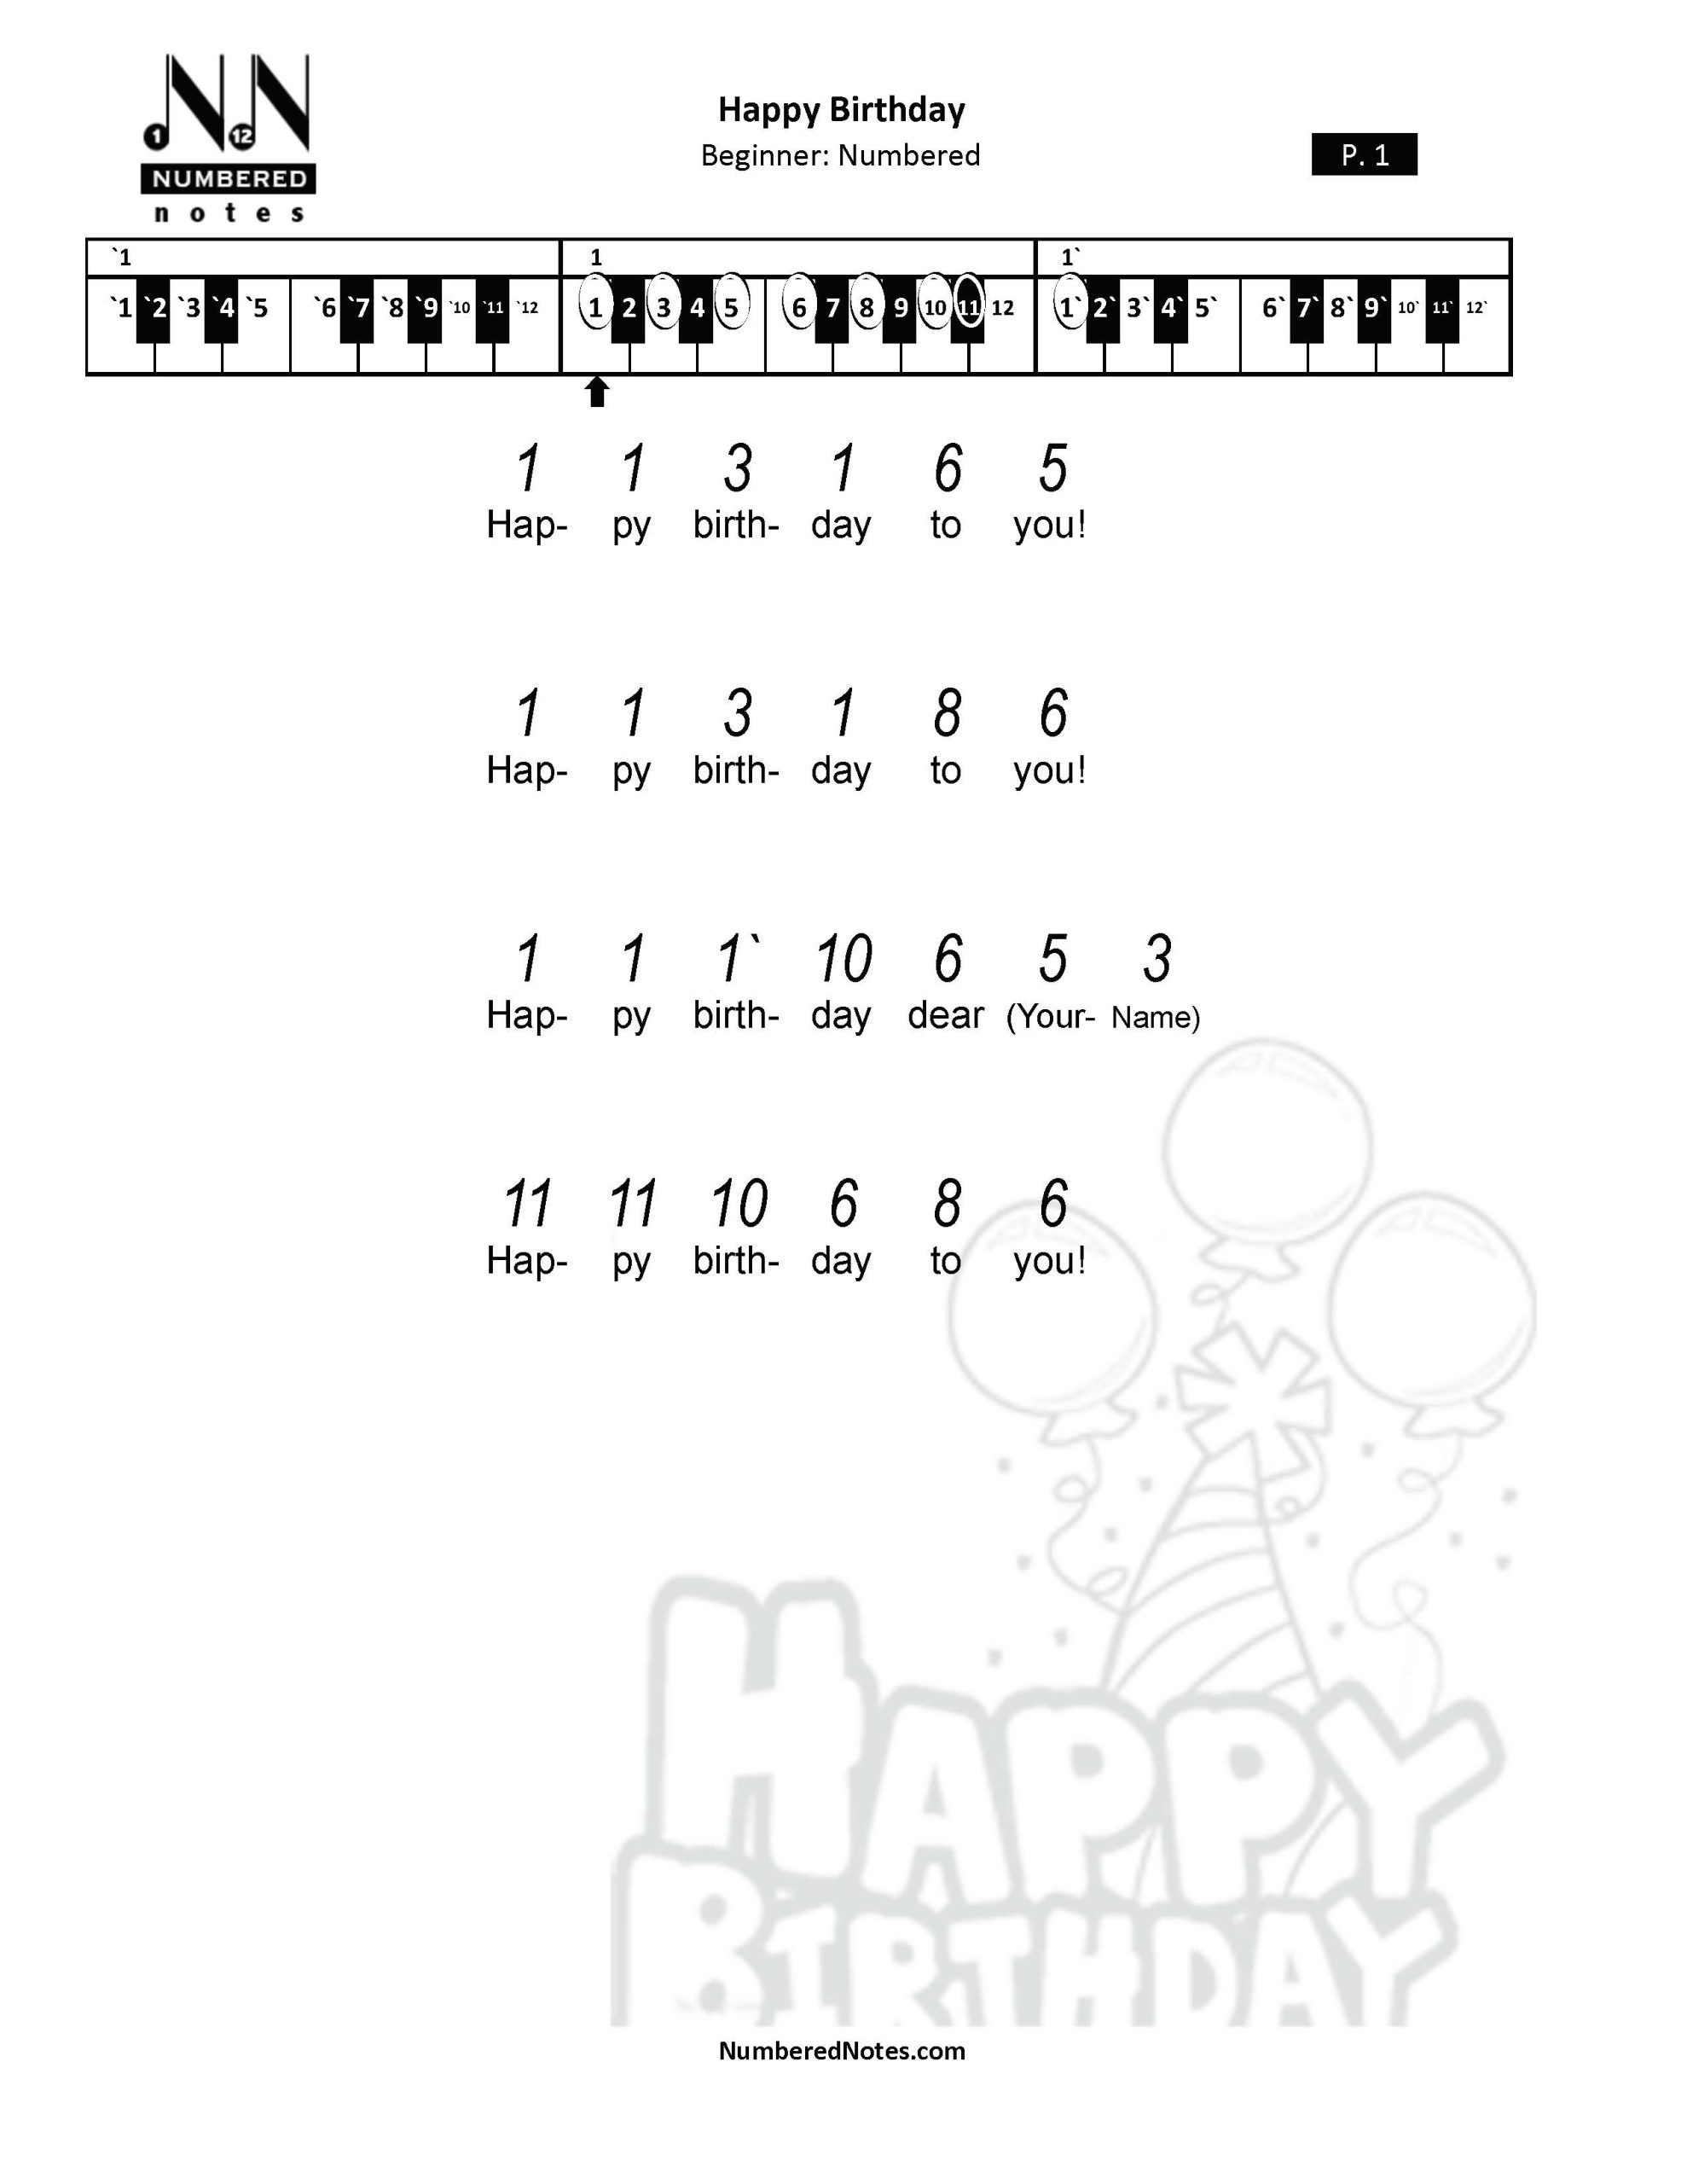 birthday song with chords and lyrics